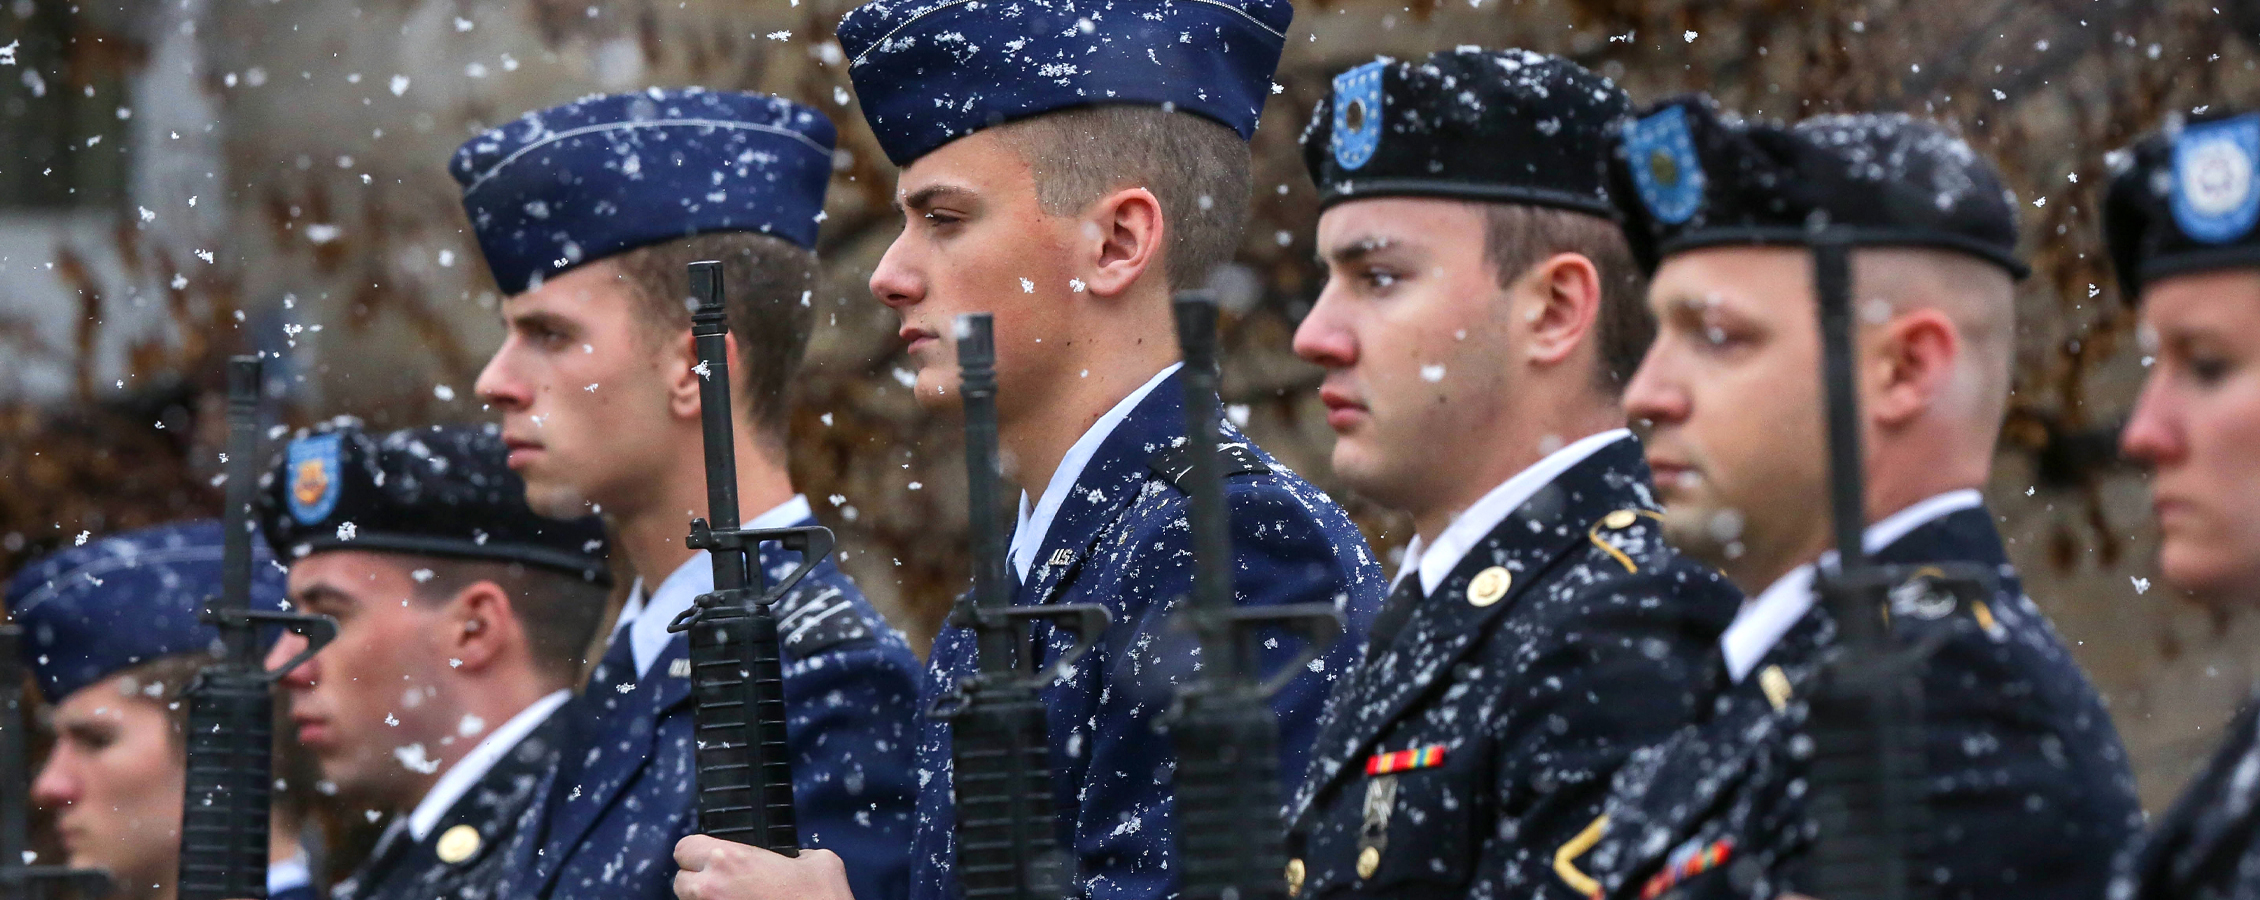 Veterans stand with their rifles as it snows.